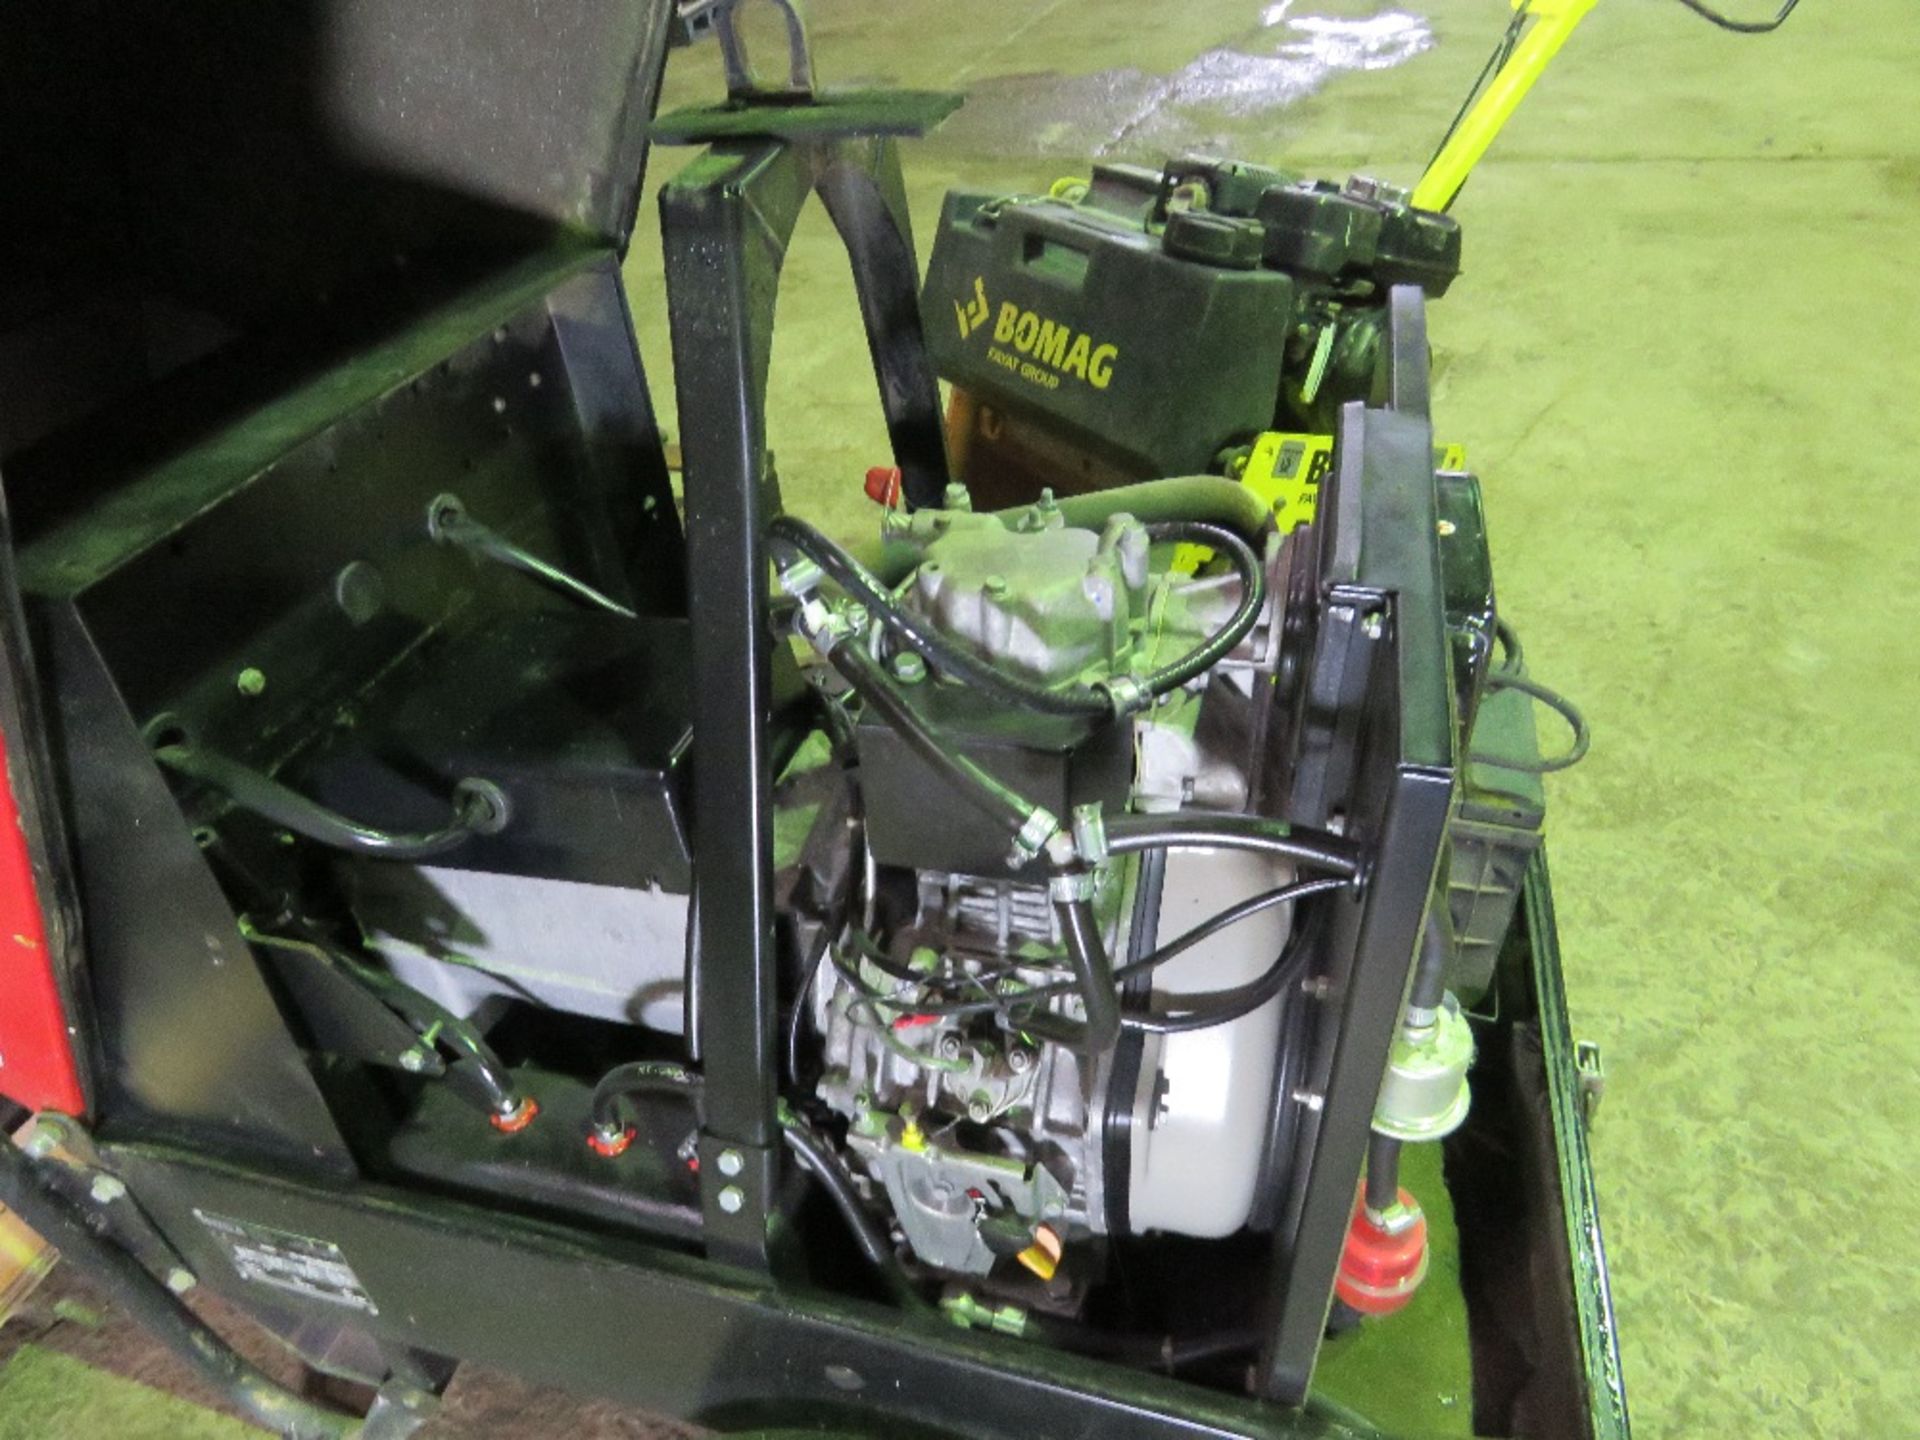 MOSA GE6000SX/GS BARROW GENERATOR. YEAR 2014 BUILD. WHEN TESTED WAS SEEN TO RUN BUT WAS NOT SHOWING - Image 5 of 6